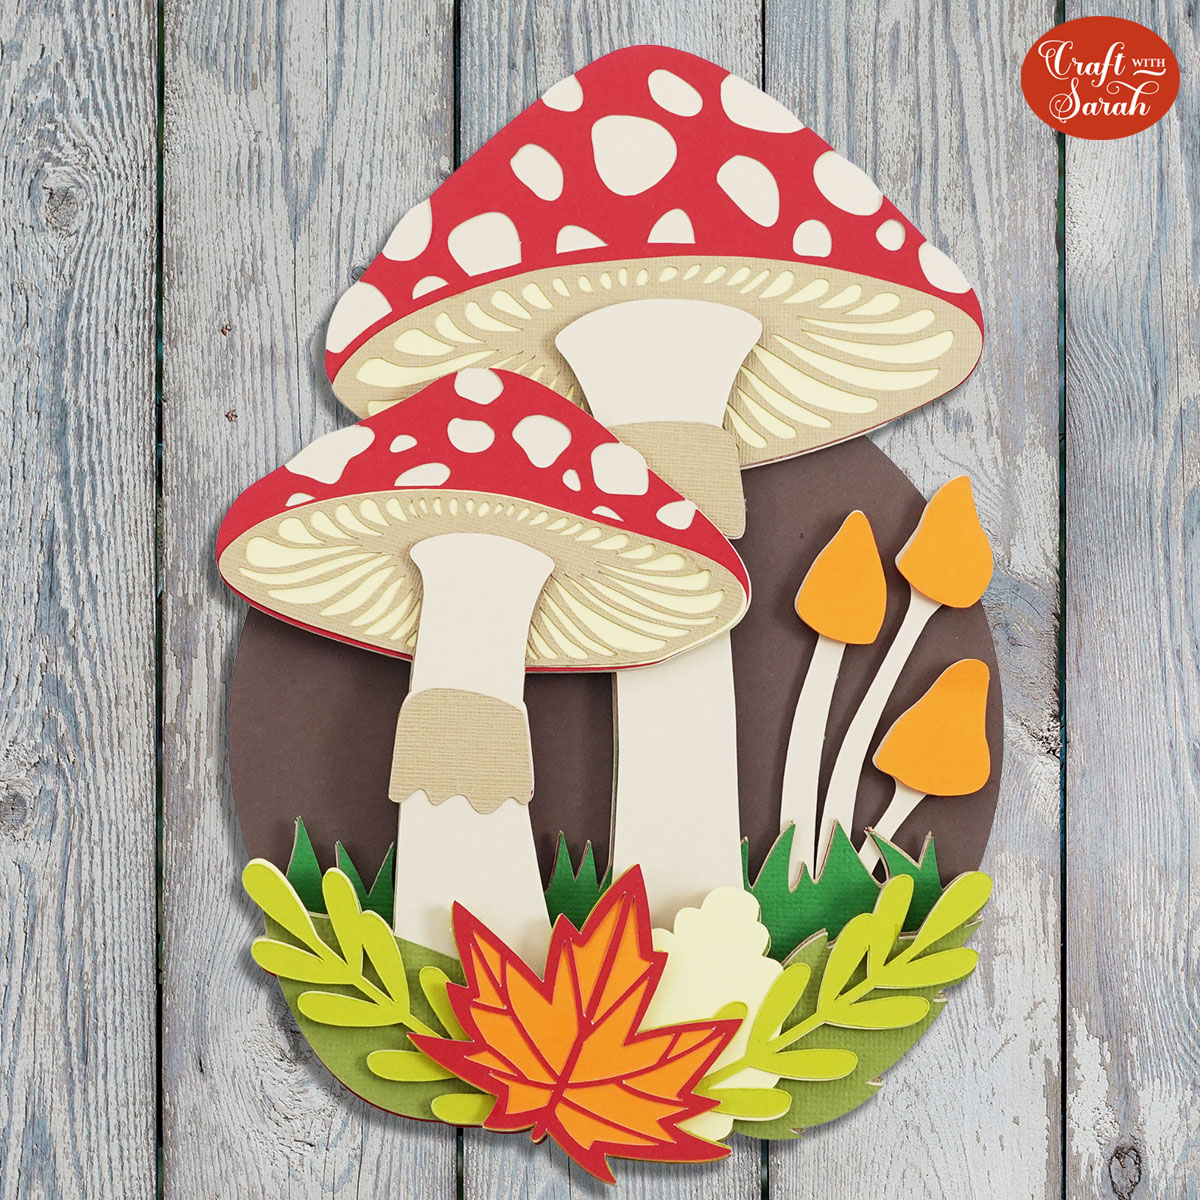 Free layered toadstools SVG